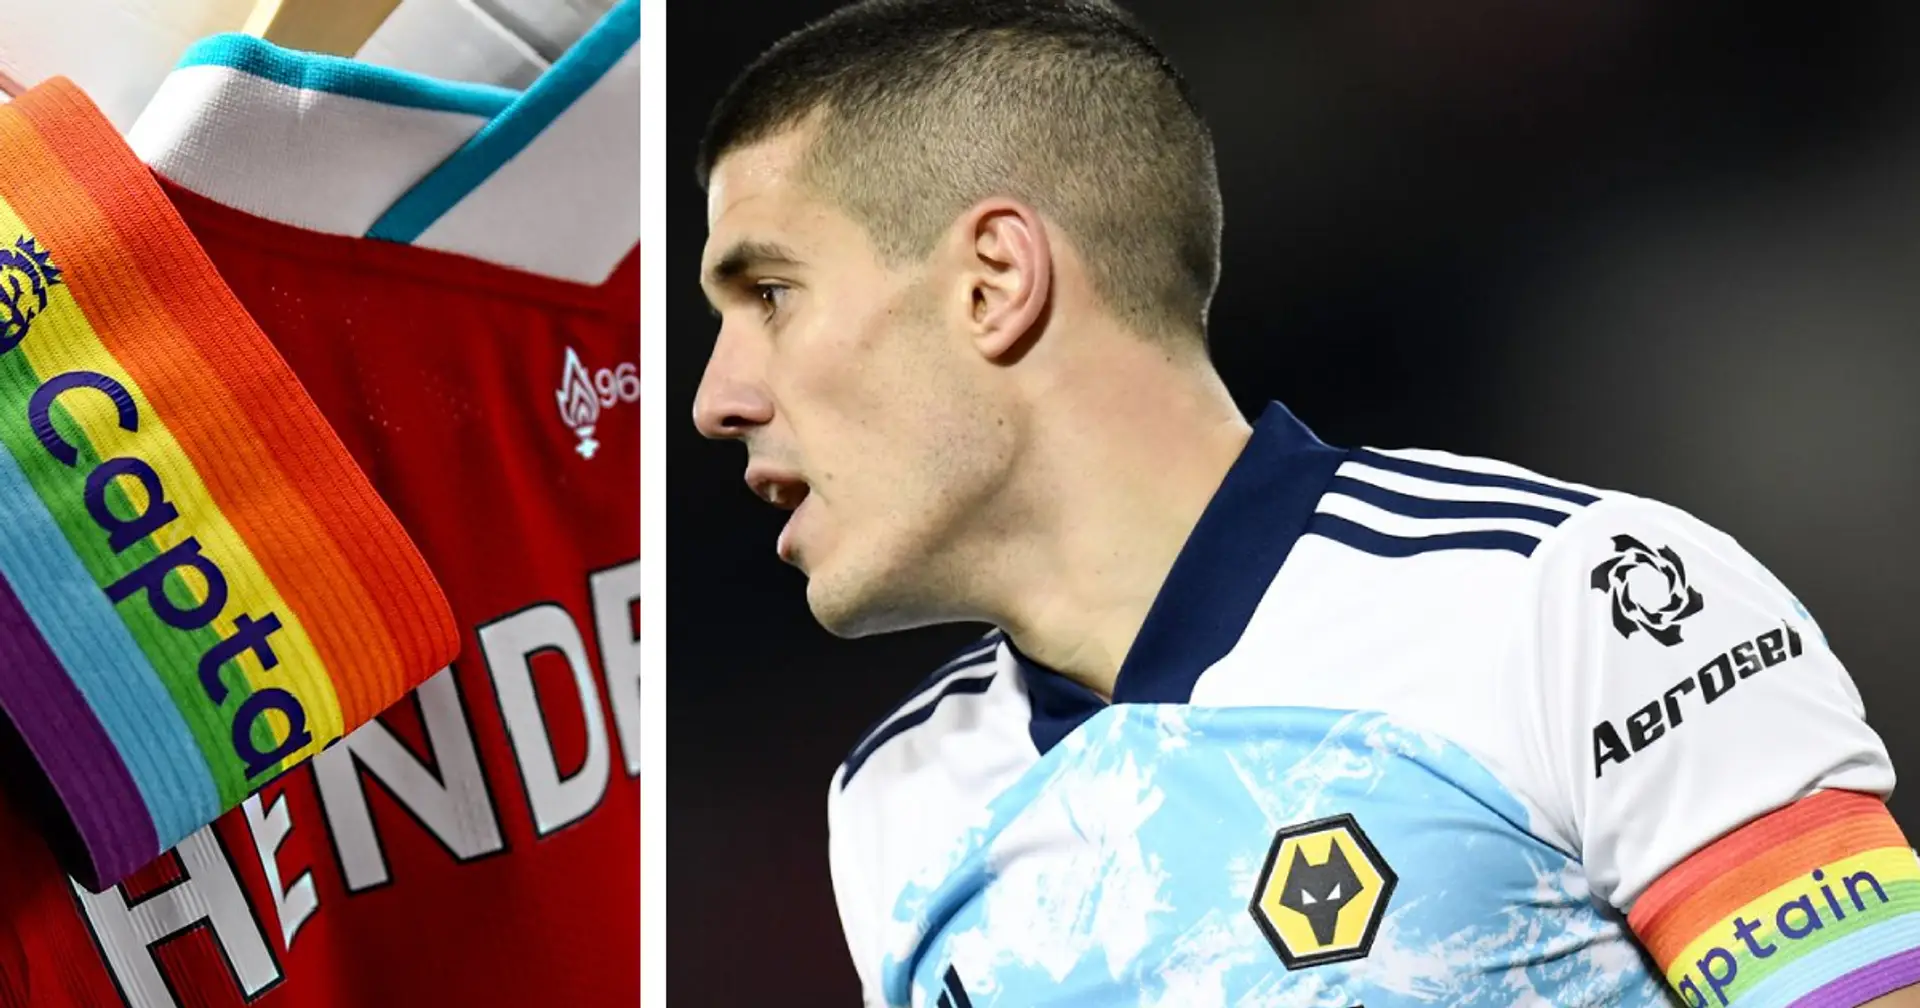 Ex-Liverpool man Conor Coady wins 'Football Ally' at British LGBT awards, Hendo and Klopp also honoured